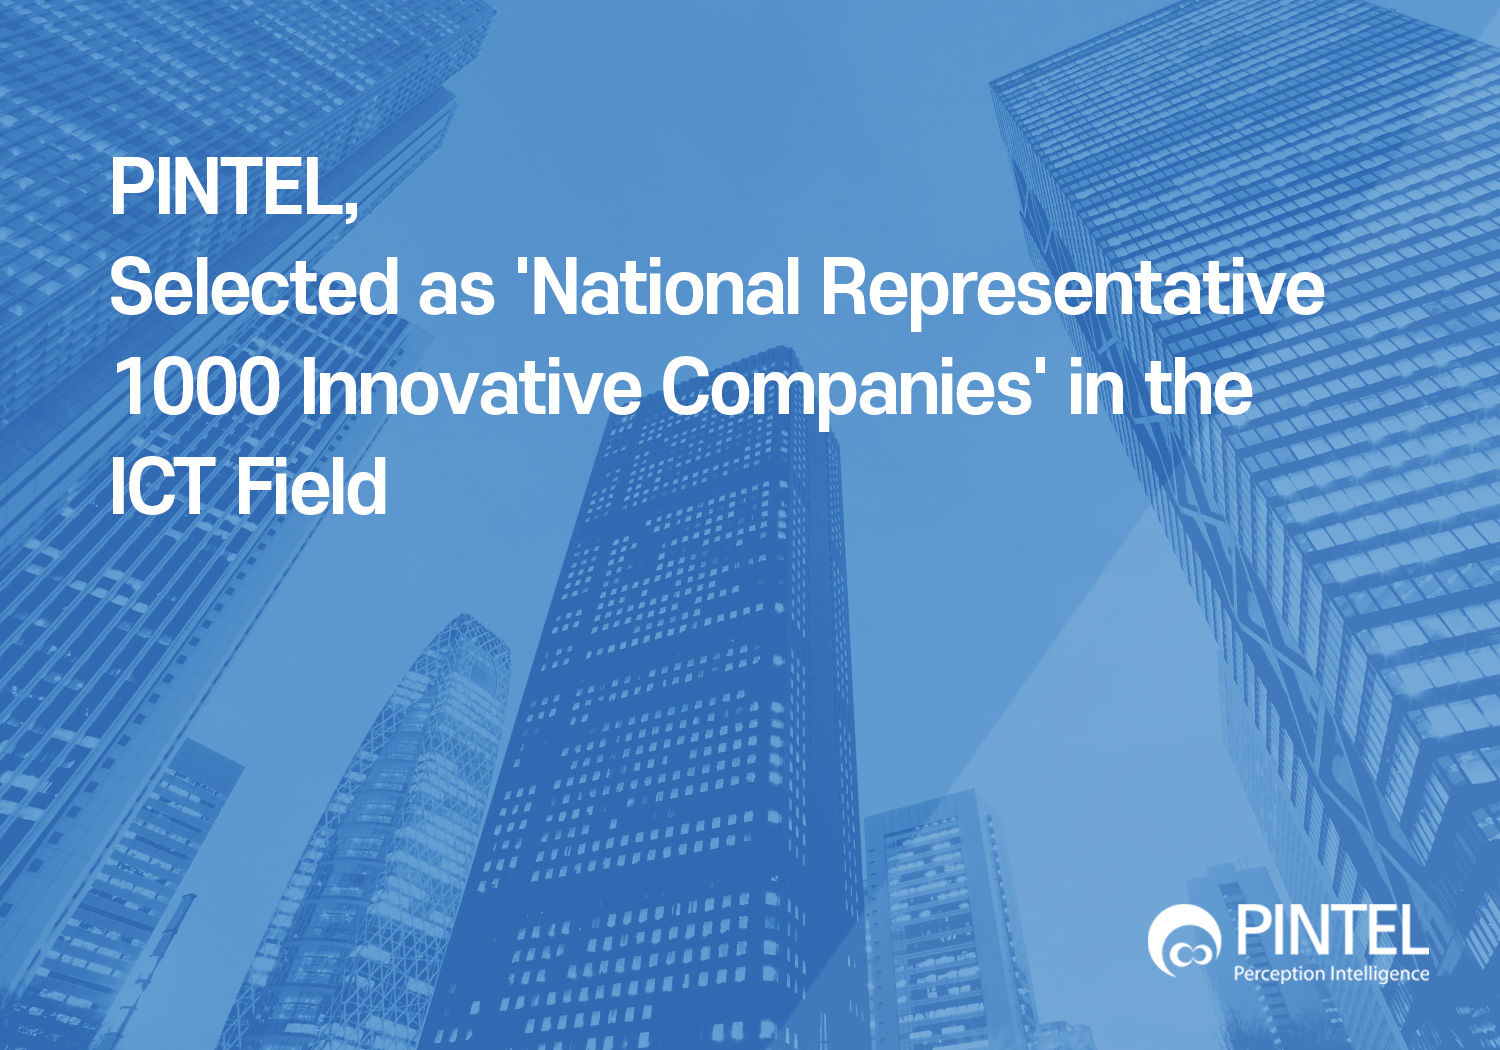 PINTEL, selected as 'National Representative 1000 Innovative Companies' in the ICT field 썸네일